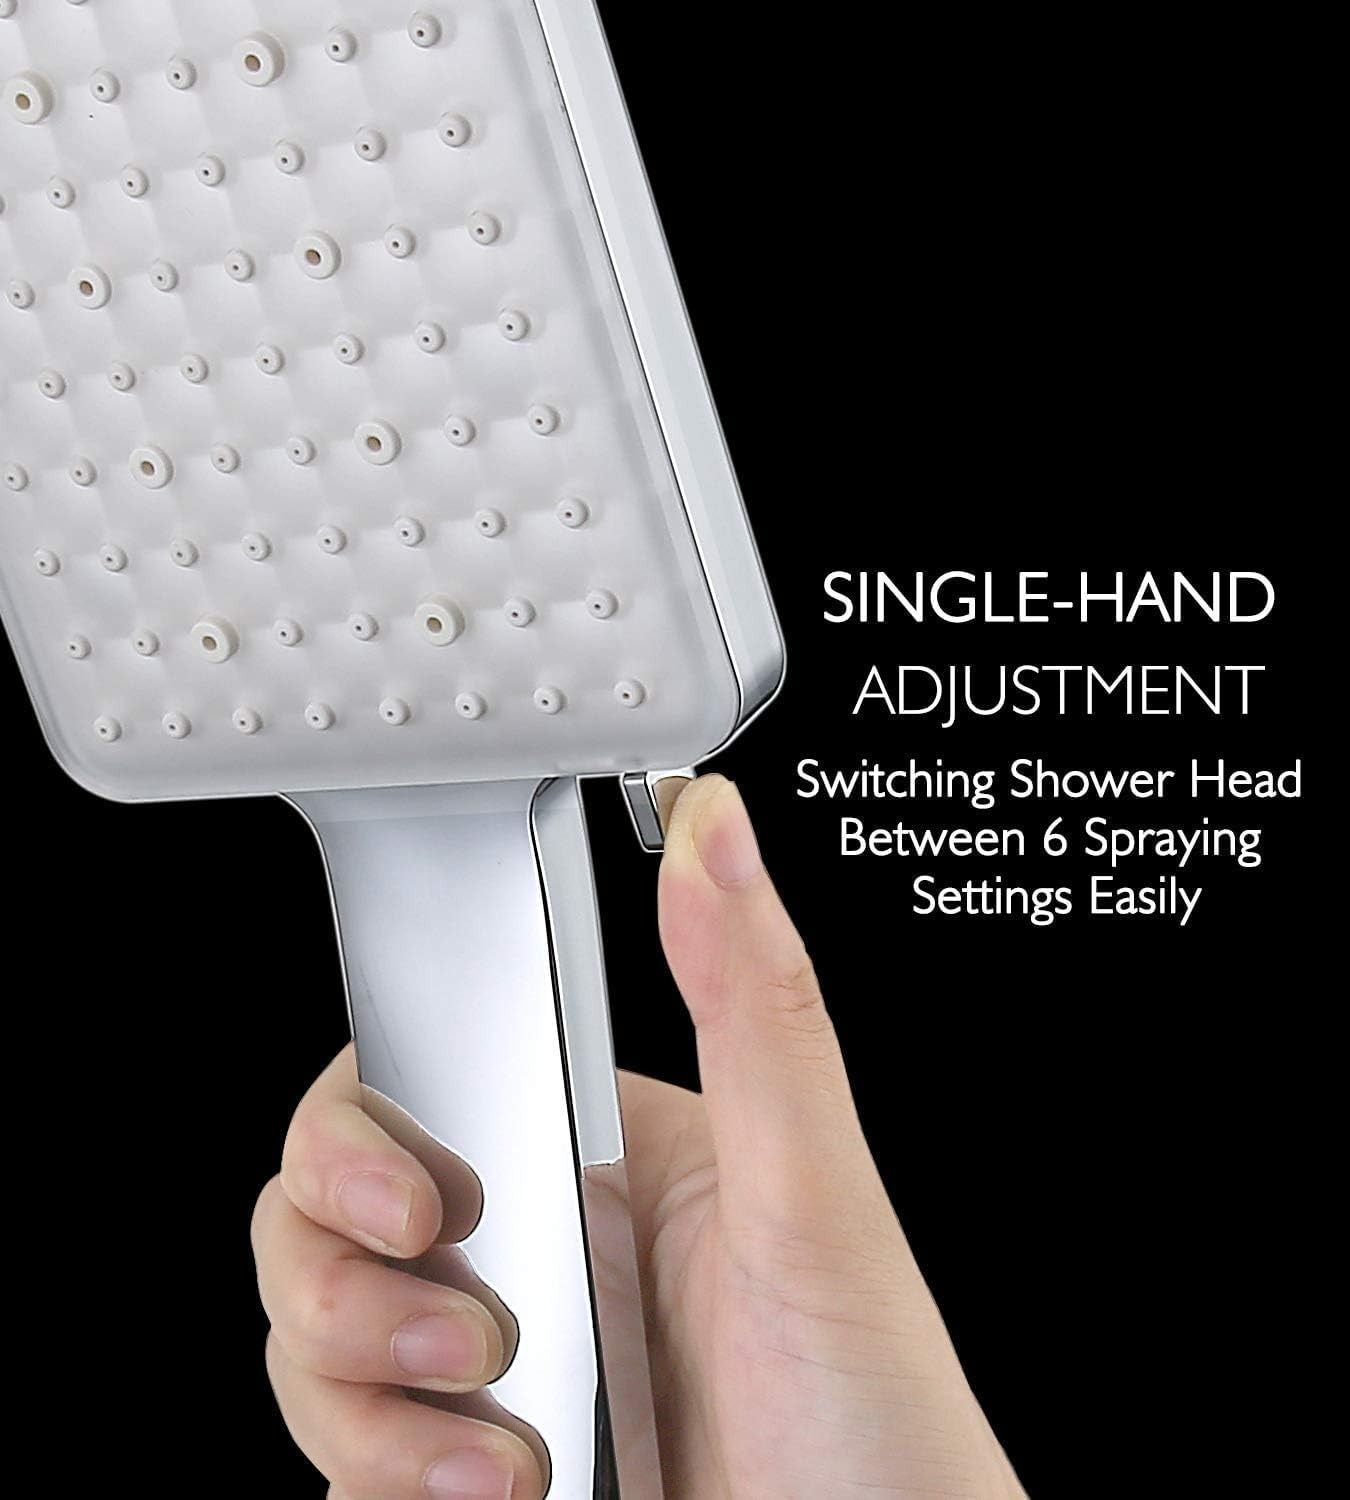 Single Hand Spray Modes/Settings Adjustable Shower Head $12.99 and others + FS w/PRIME